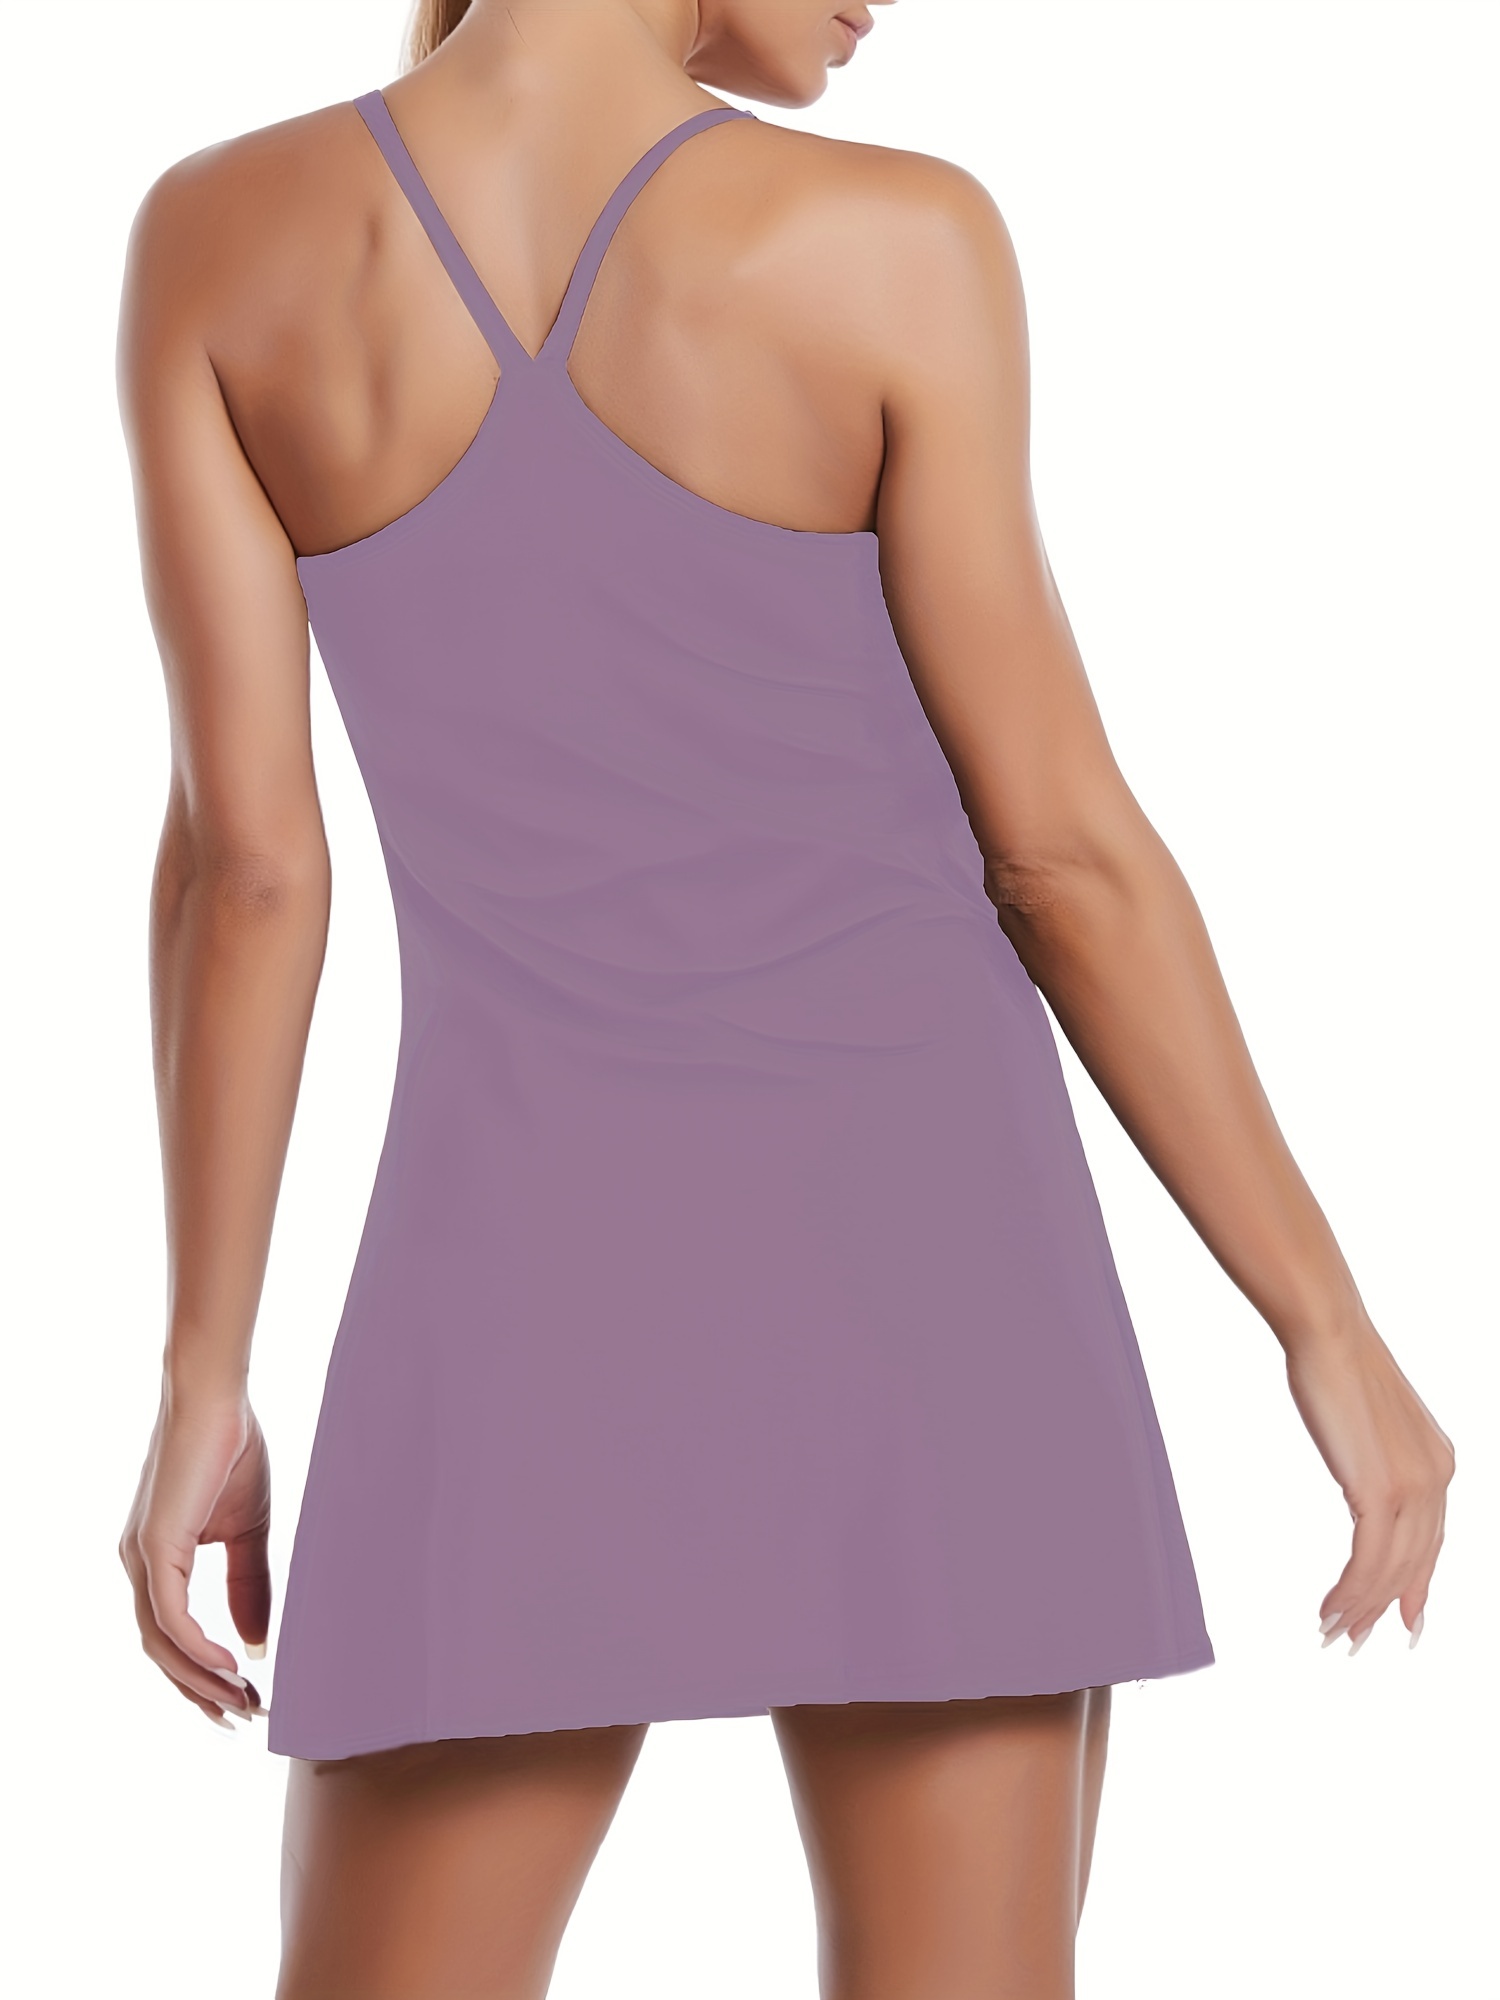 Women Summer Casual Athletic Dress Tennis Dress with Built in Bra Solid  Hollow Out Loose Strap Workout Outfit Trendy (Purple, XL)